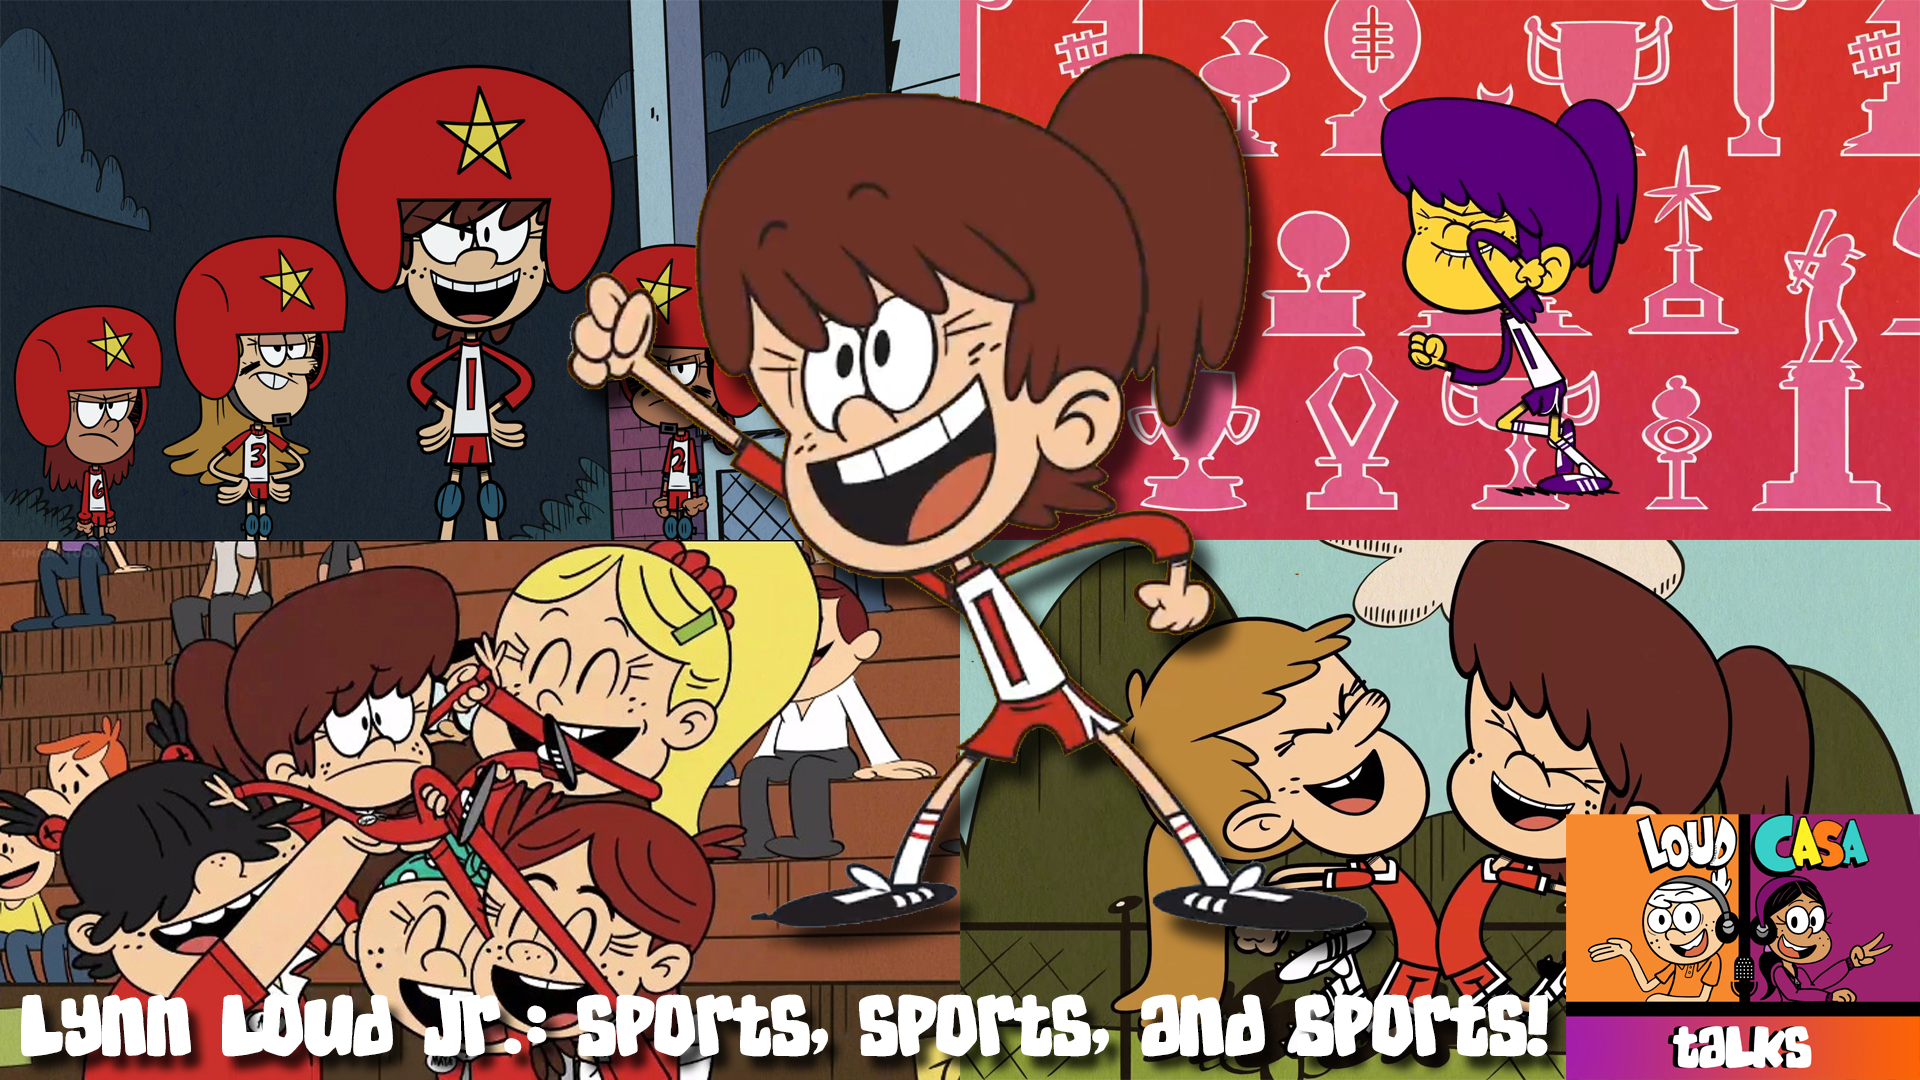 The Fanpage of The Loud House and The Casagrandes в Twitter: „Lynn Loud Jr. has one thing in mind: Sports. But what sport will be the one that she will be pro